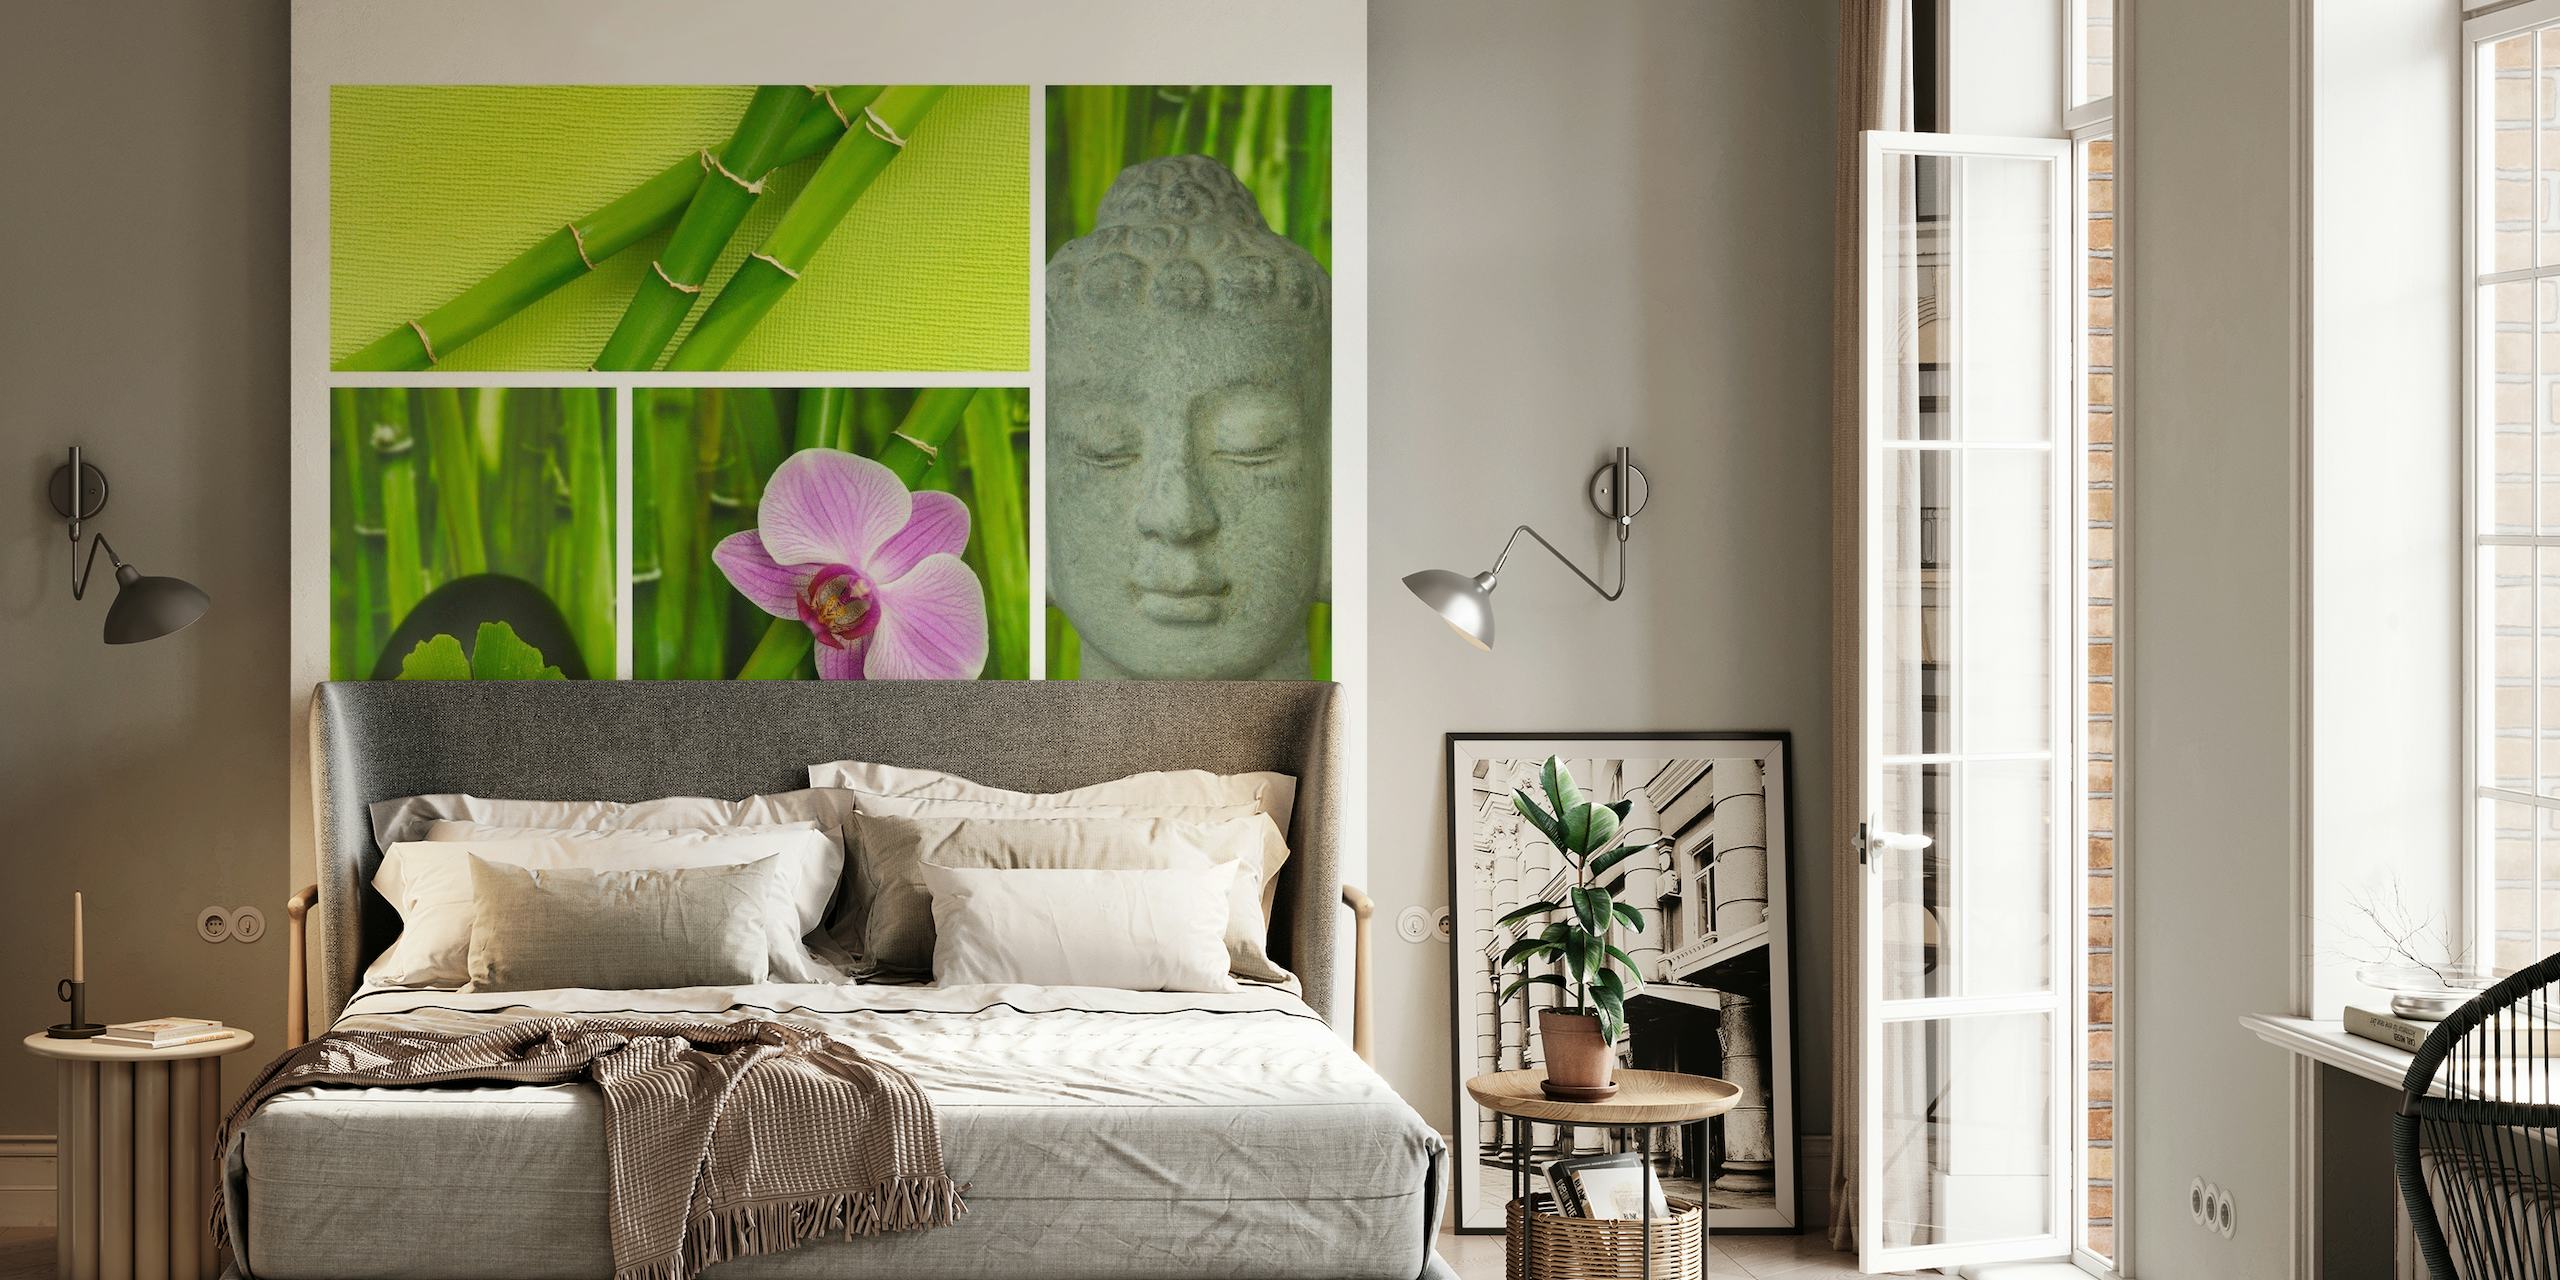 Relax Zen and Buddha wall mural with bamboo, orchid, Buddha face and 'Relax' text